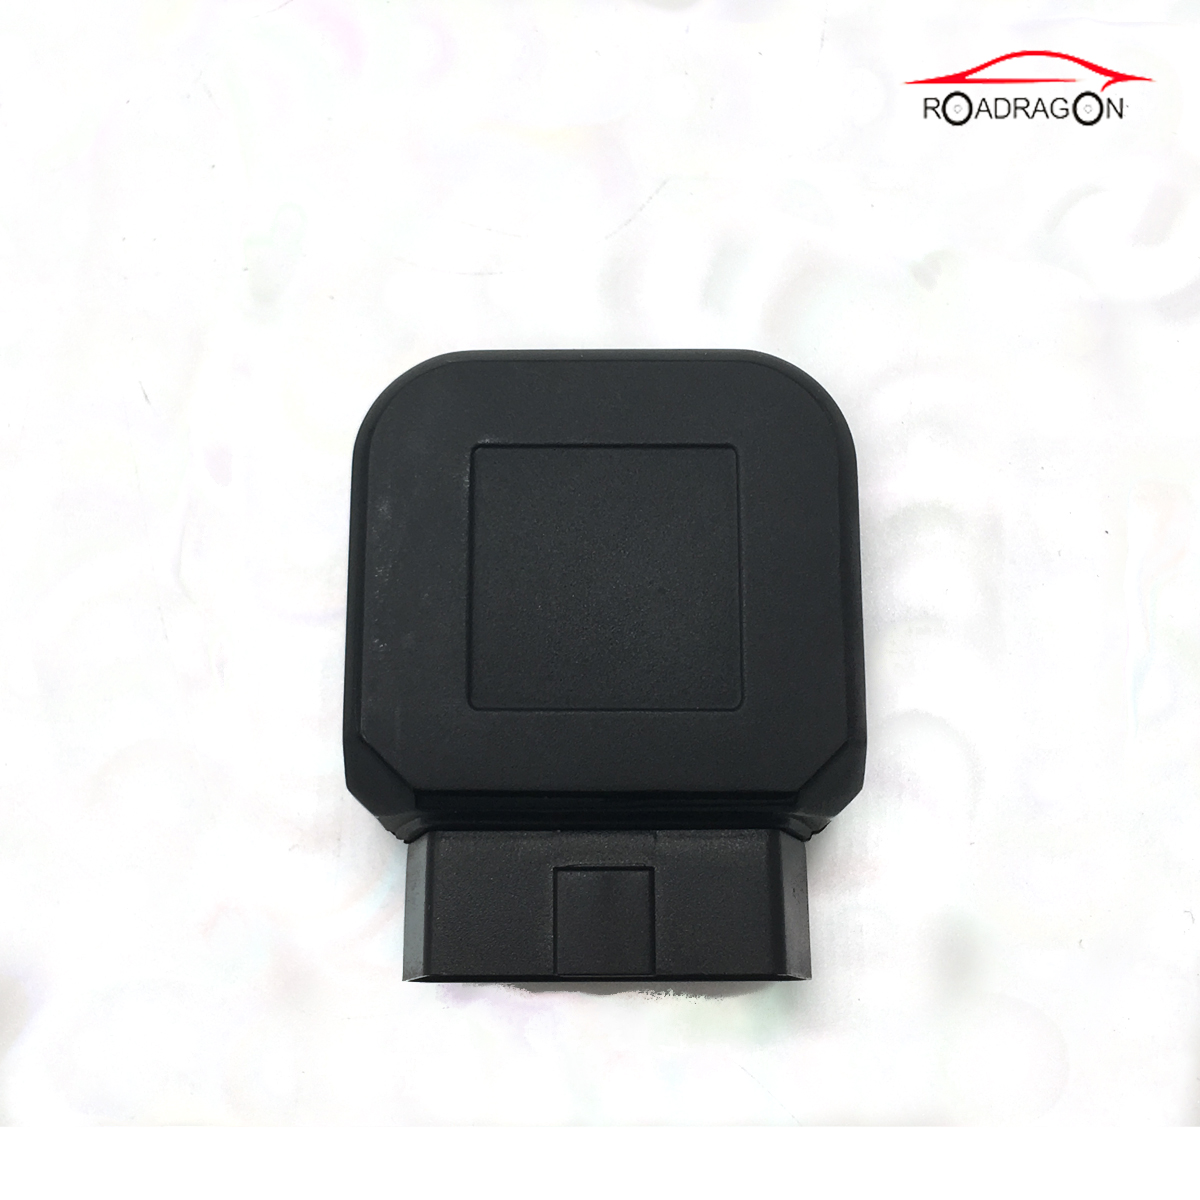 Factory making Singapore Cargo Tracking -
 M220 is an intelligent 2GOBD solution with WIFI hotspot for connected car, which integrates 2G modem and GPS. Developed on Qualcomm Snapdragon chipset and...